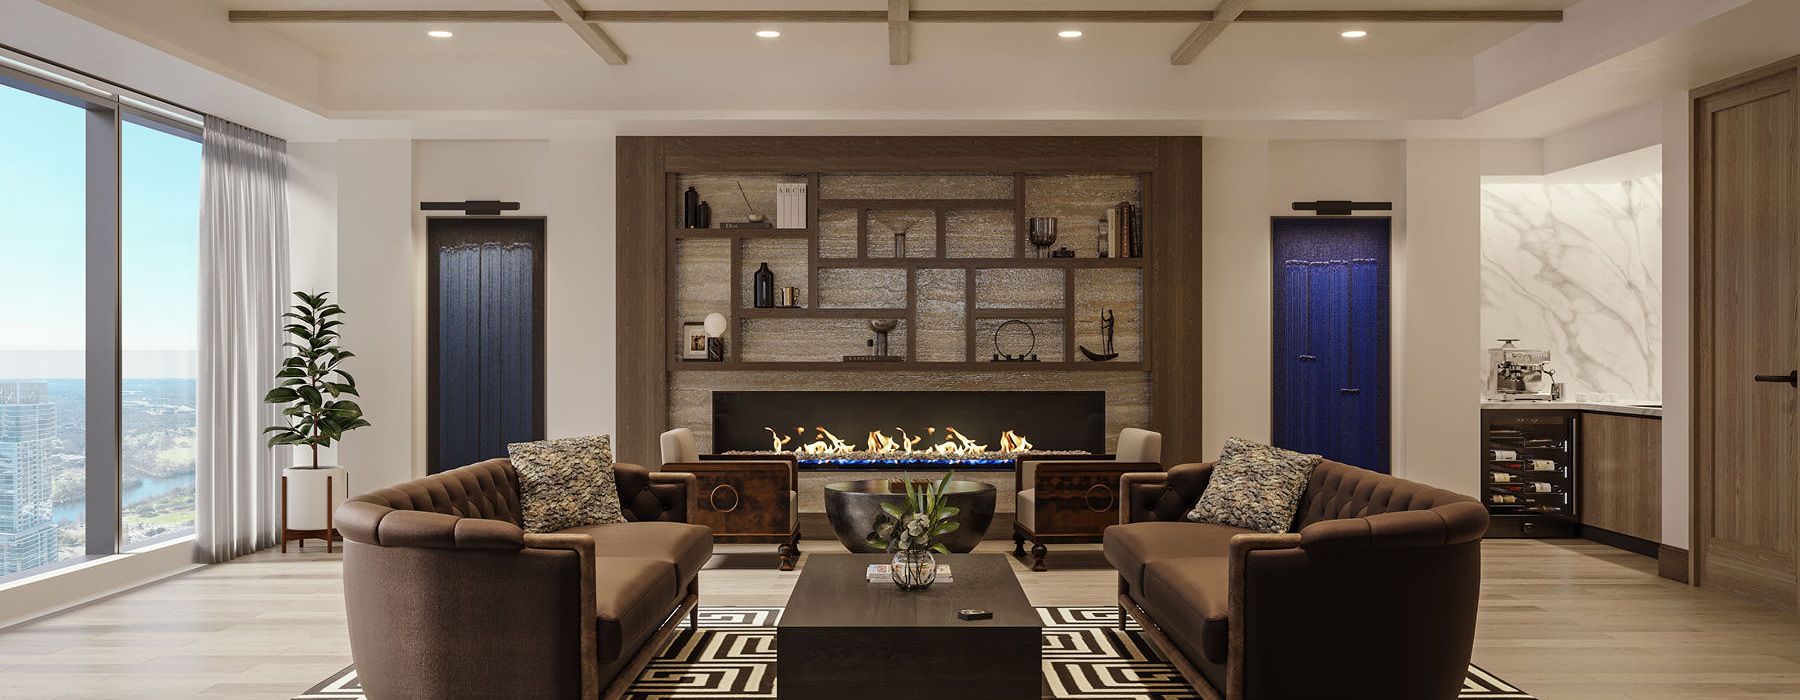 fireplace seating in bright clubhouse with city views